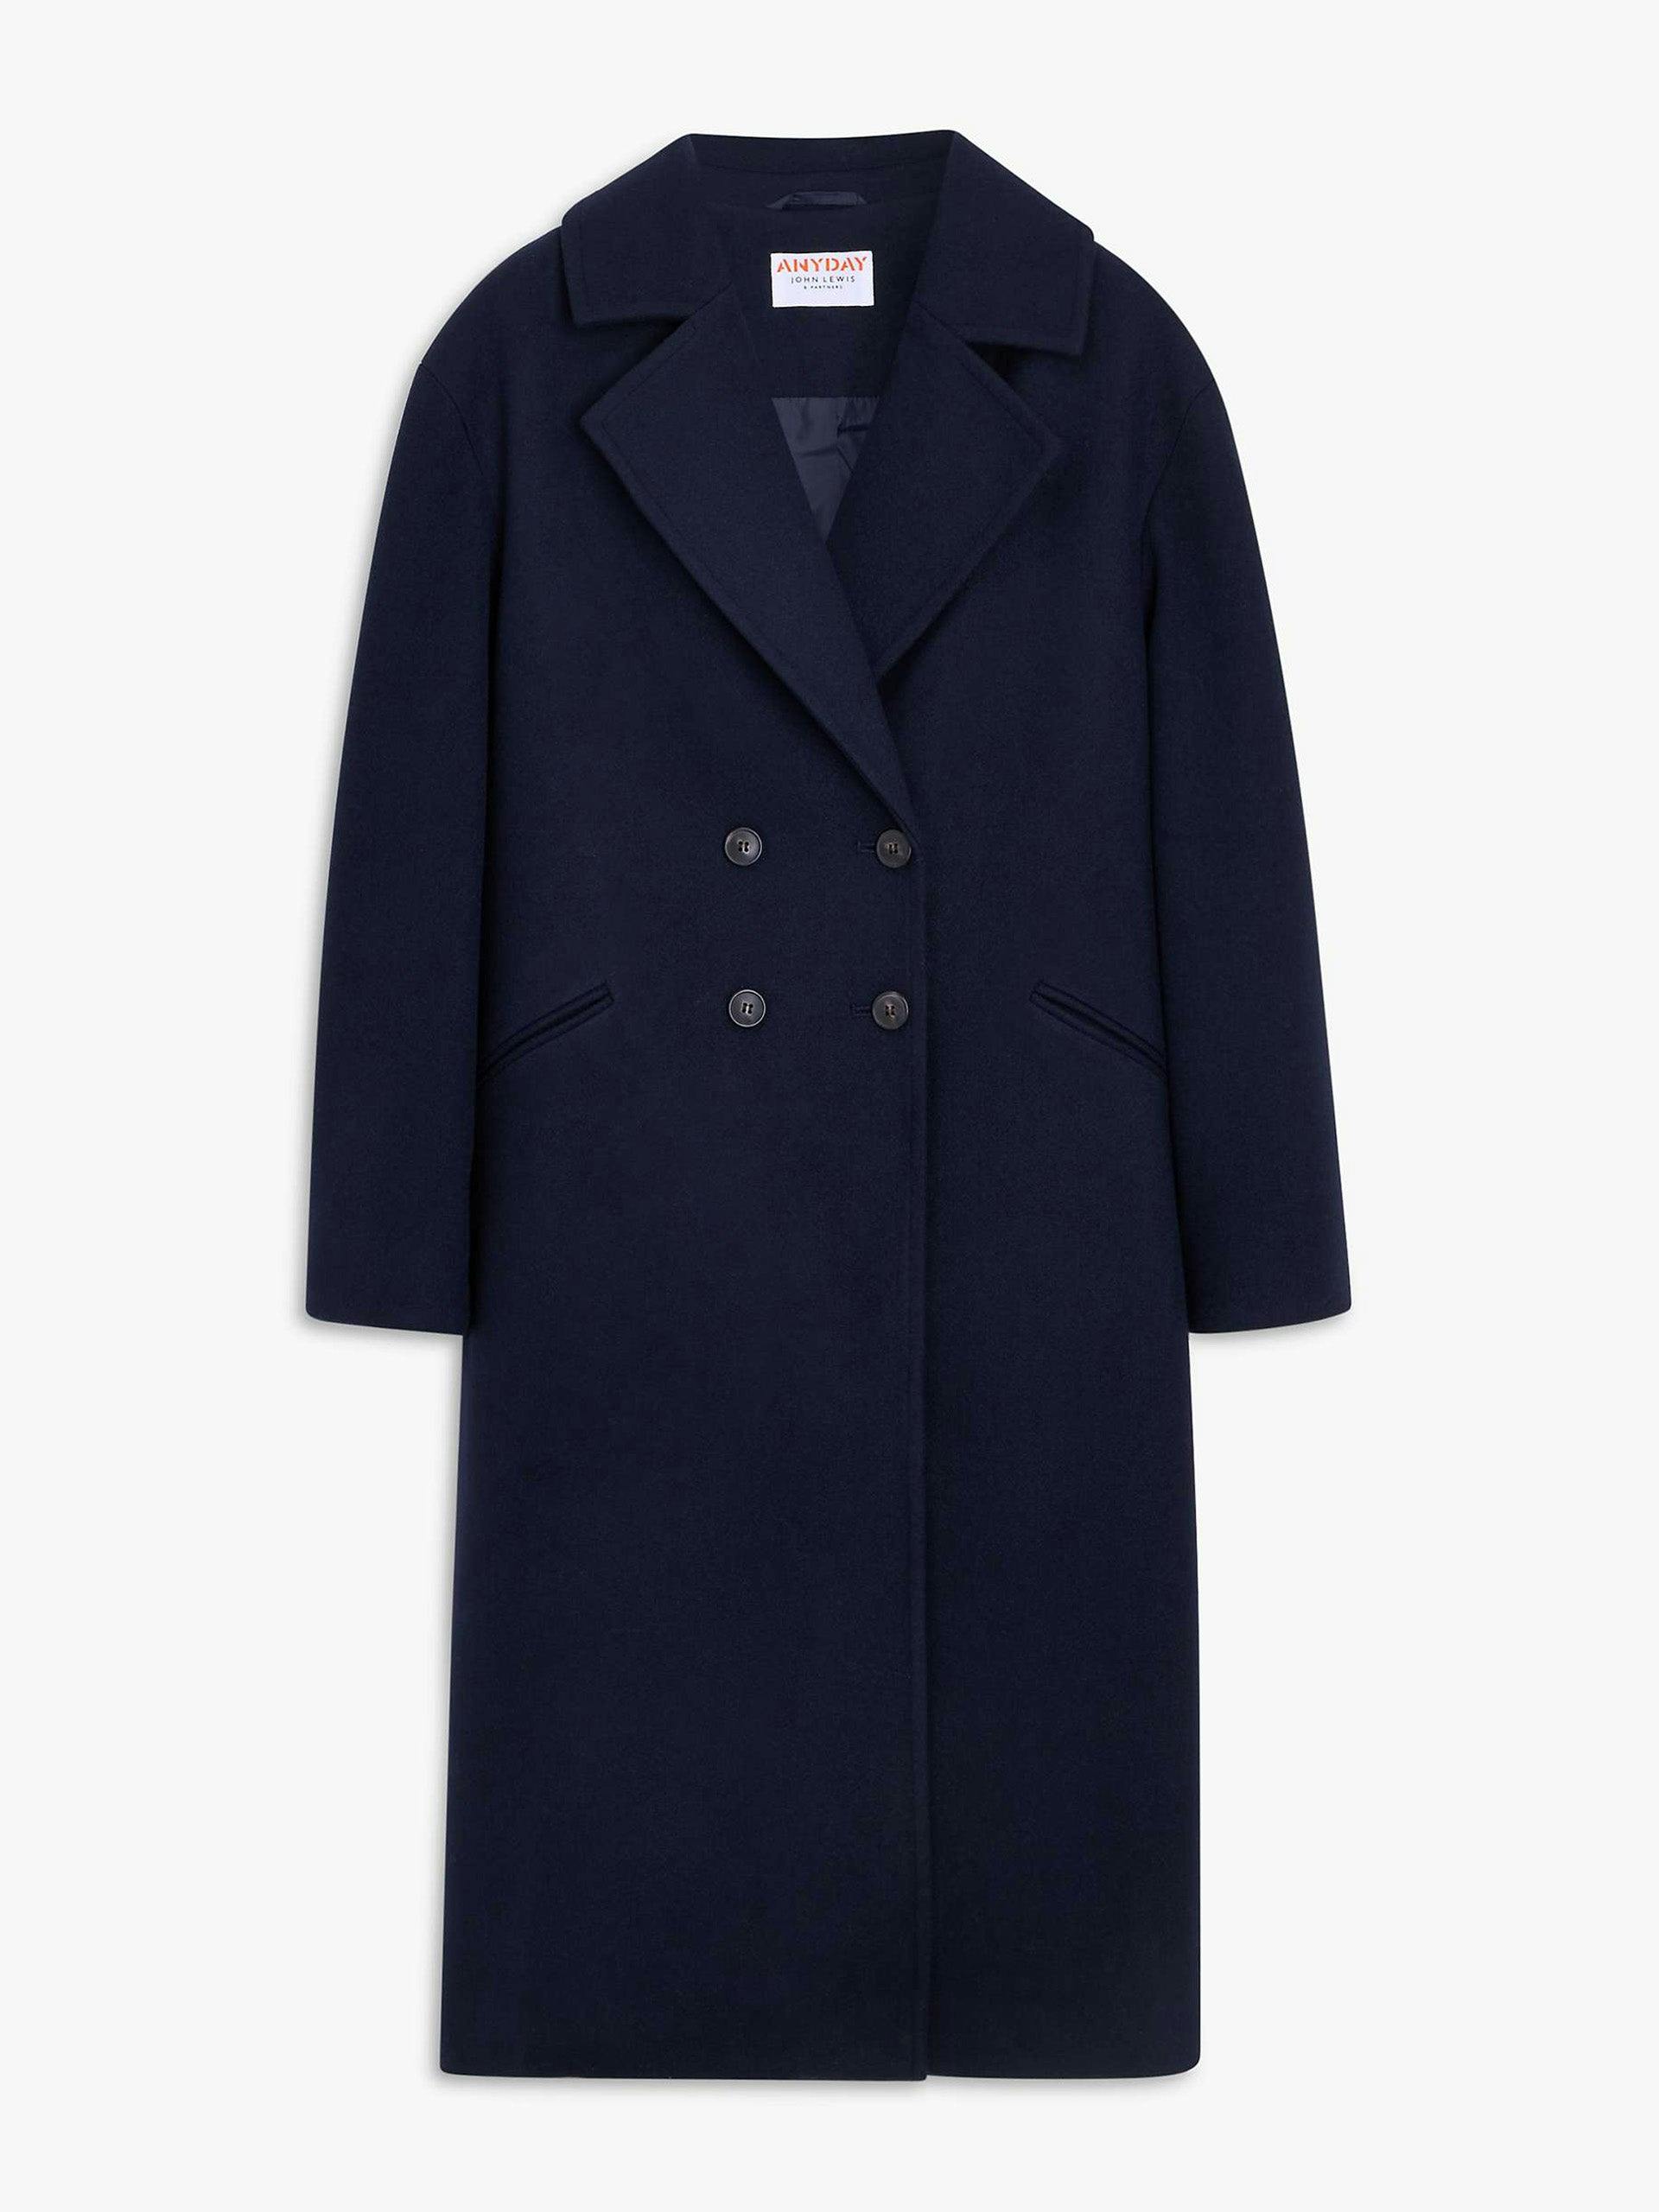 Plain double-breasted coat in Midnight